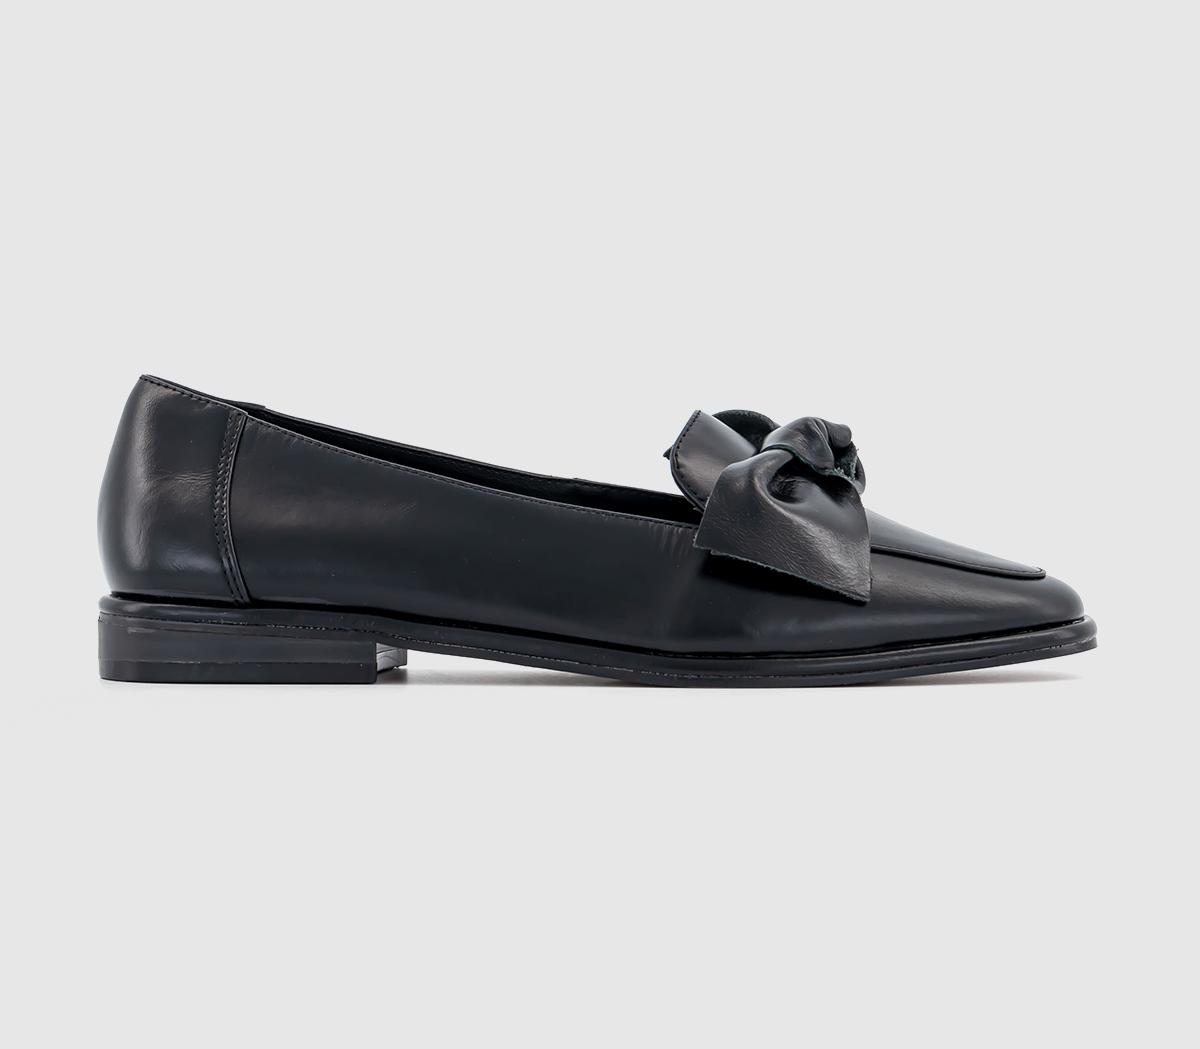 OFFICEFallon Bow Leather LoaferBlack Leather